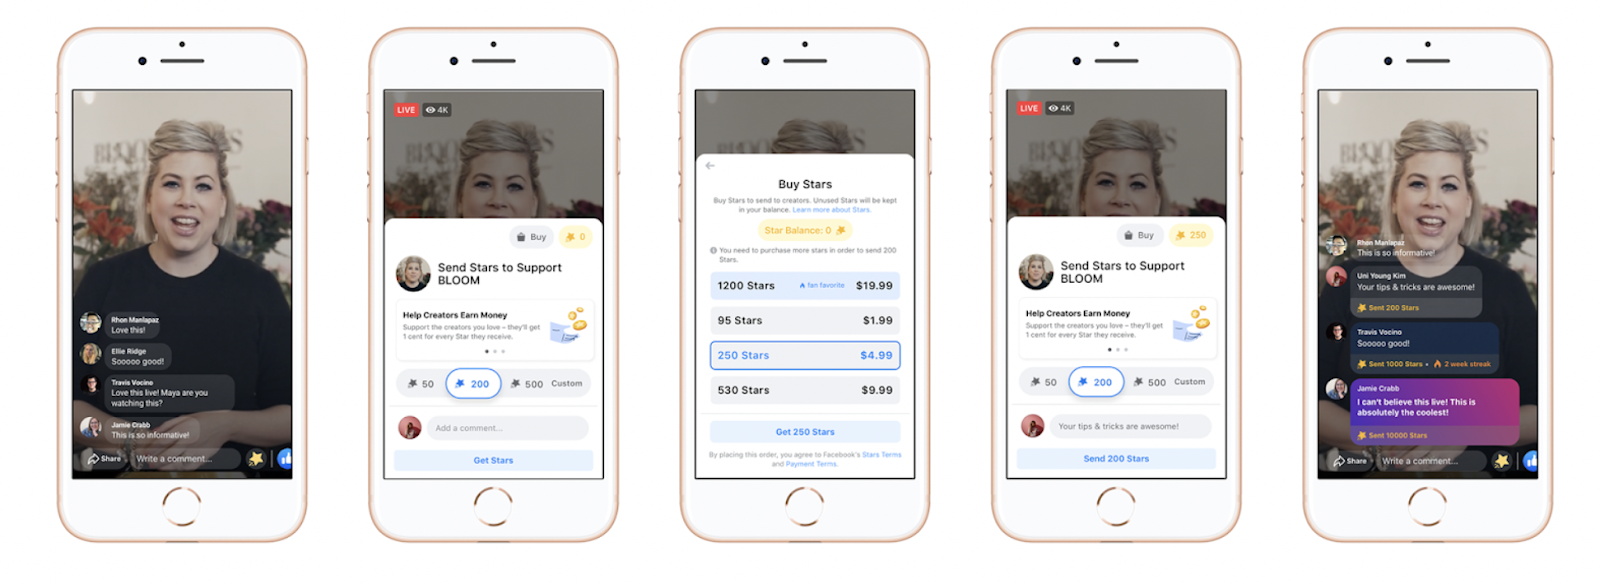 Here are Facebook’s 2 new features for artists and creators to make money